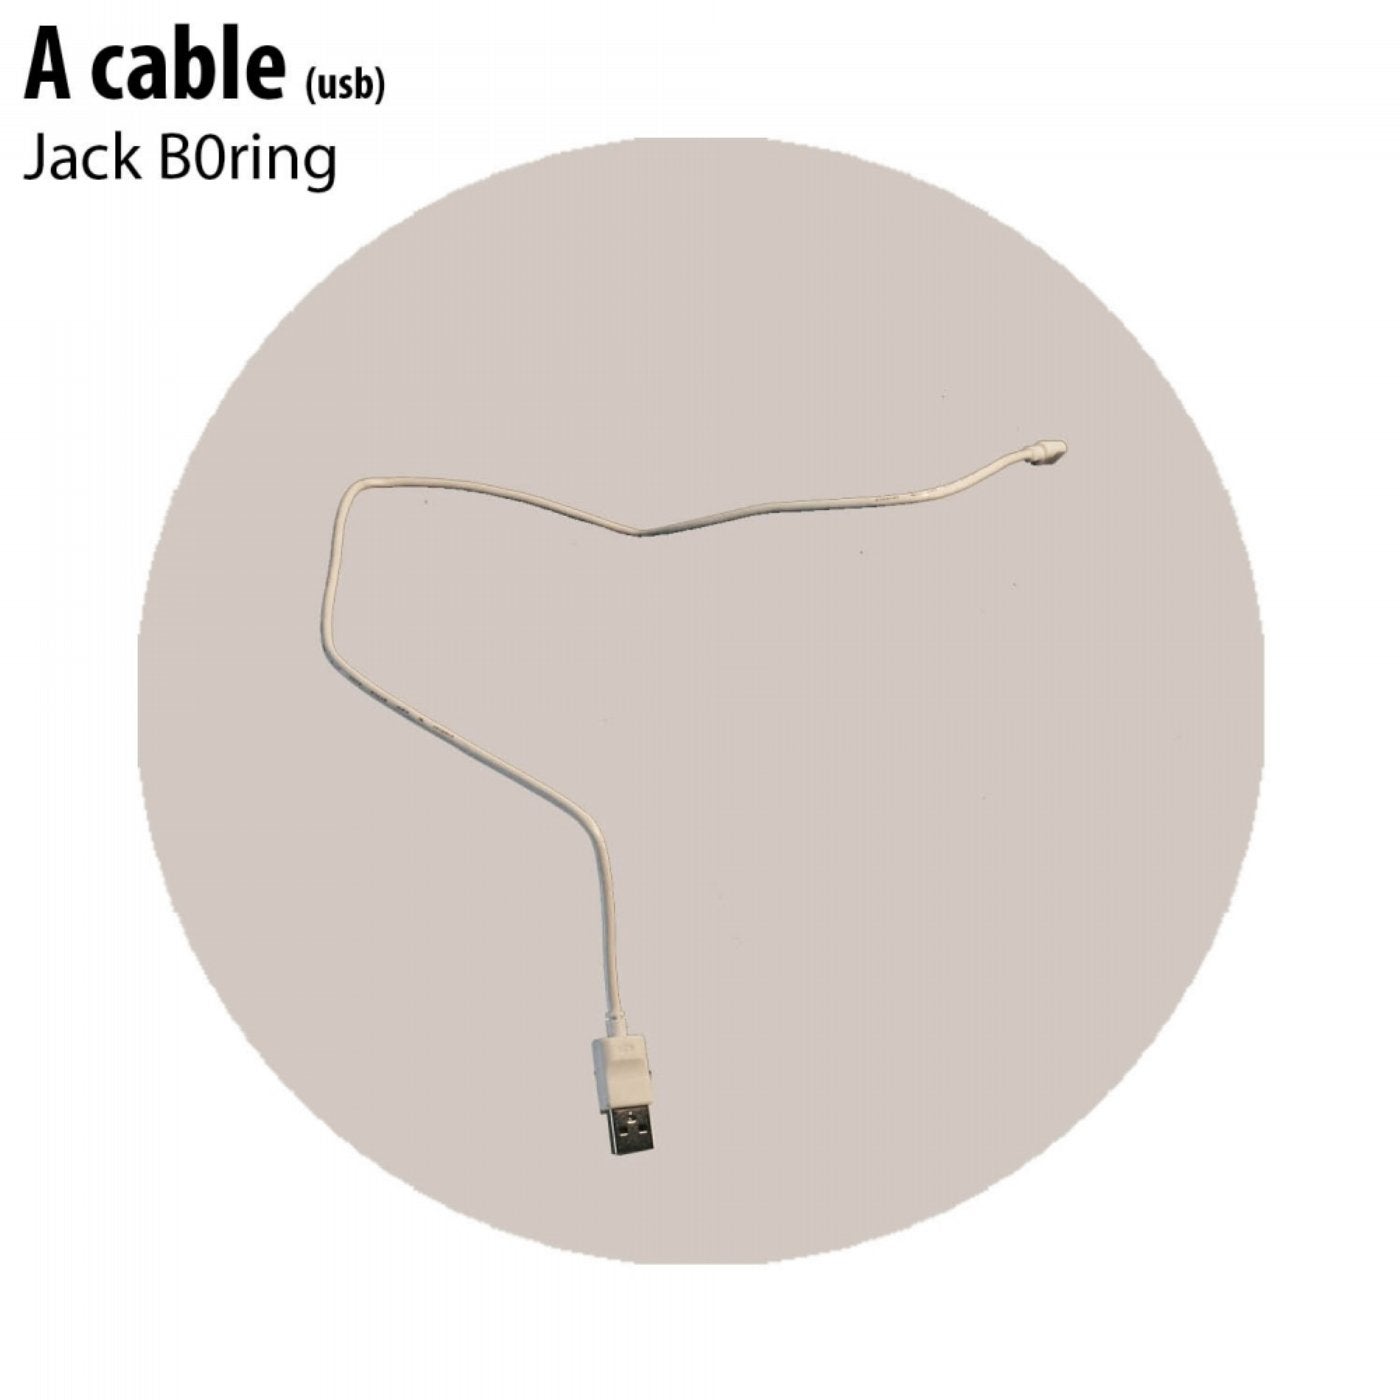 A Cable (usb)